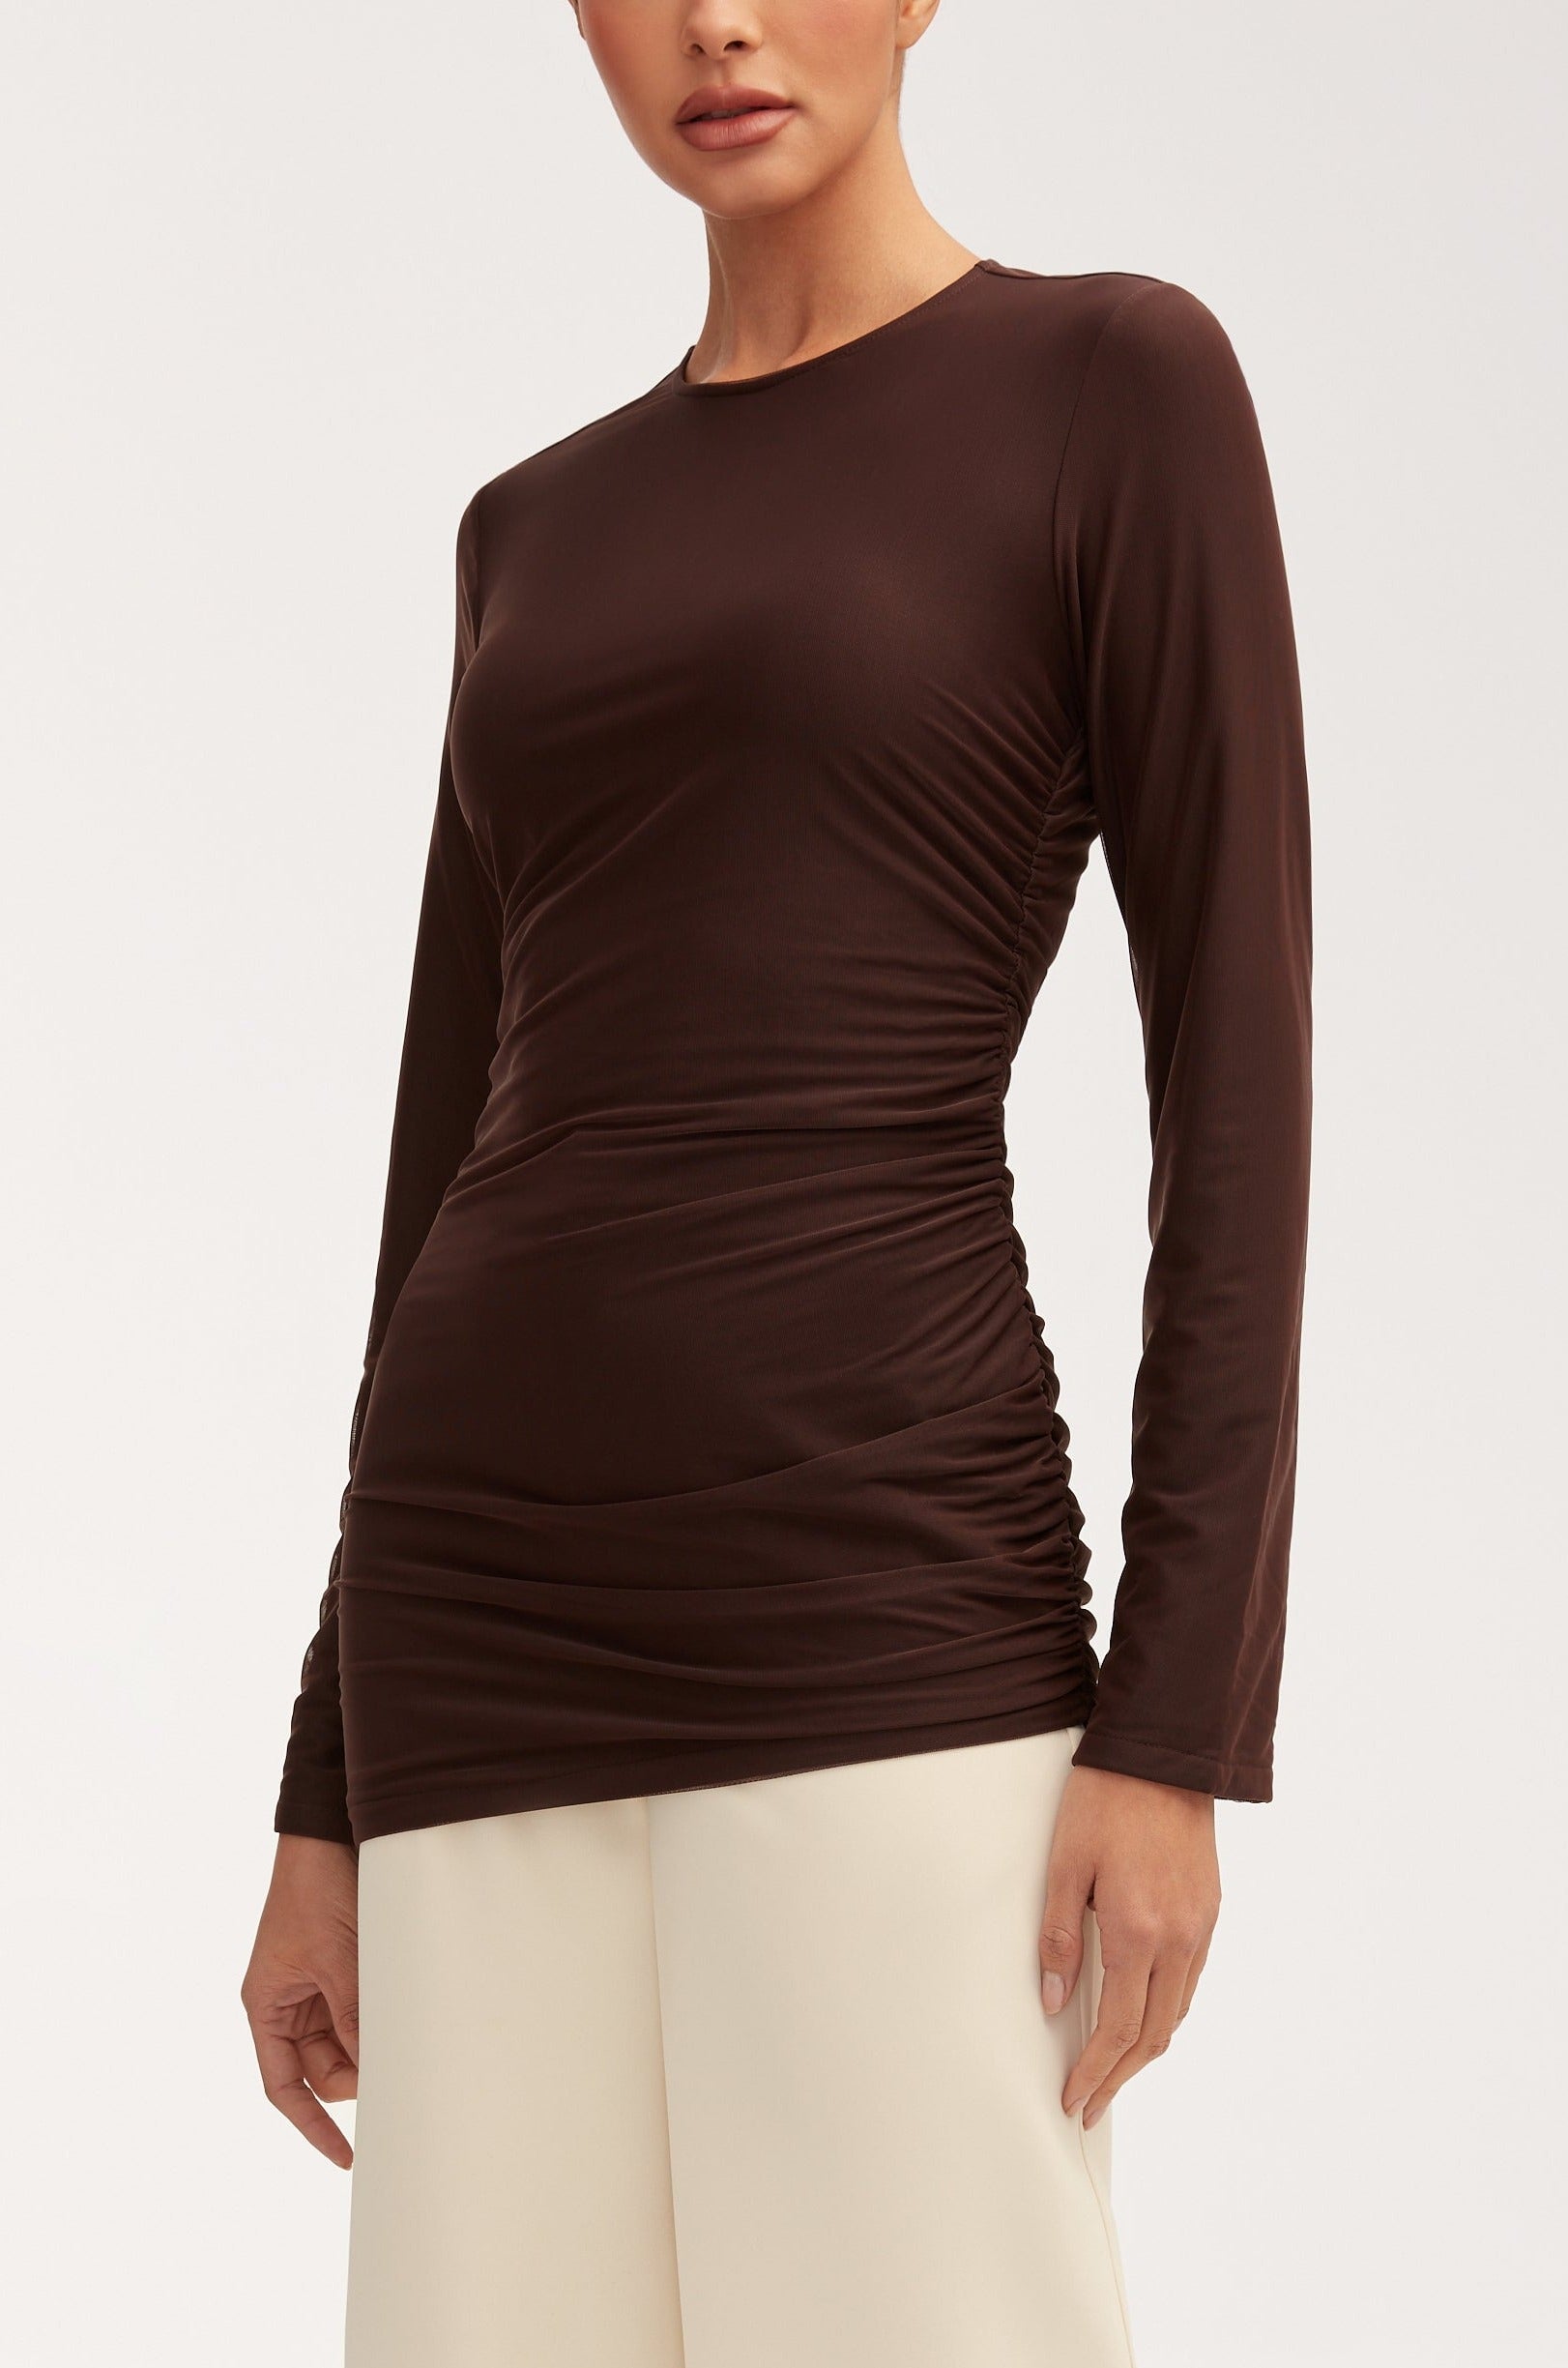 Mesh Rouched Top - Chocolate Plum Tops Veiled 